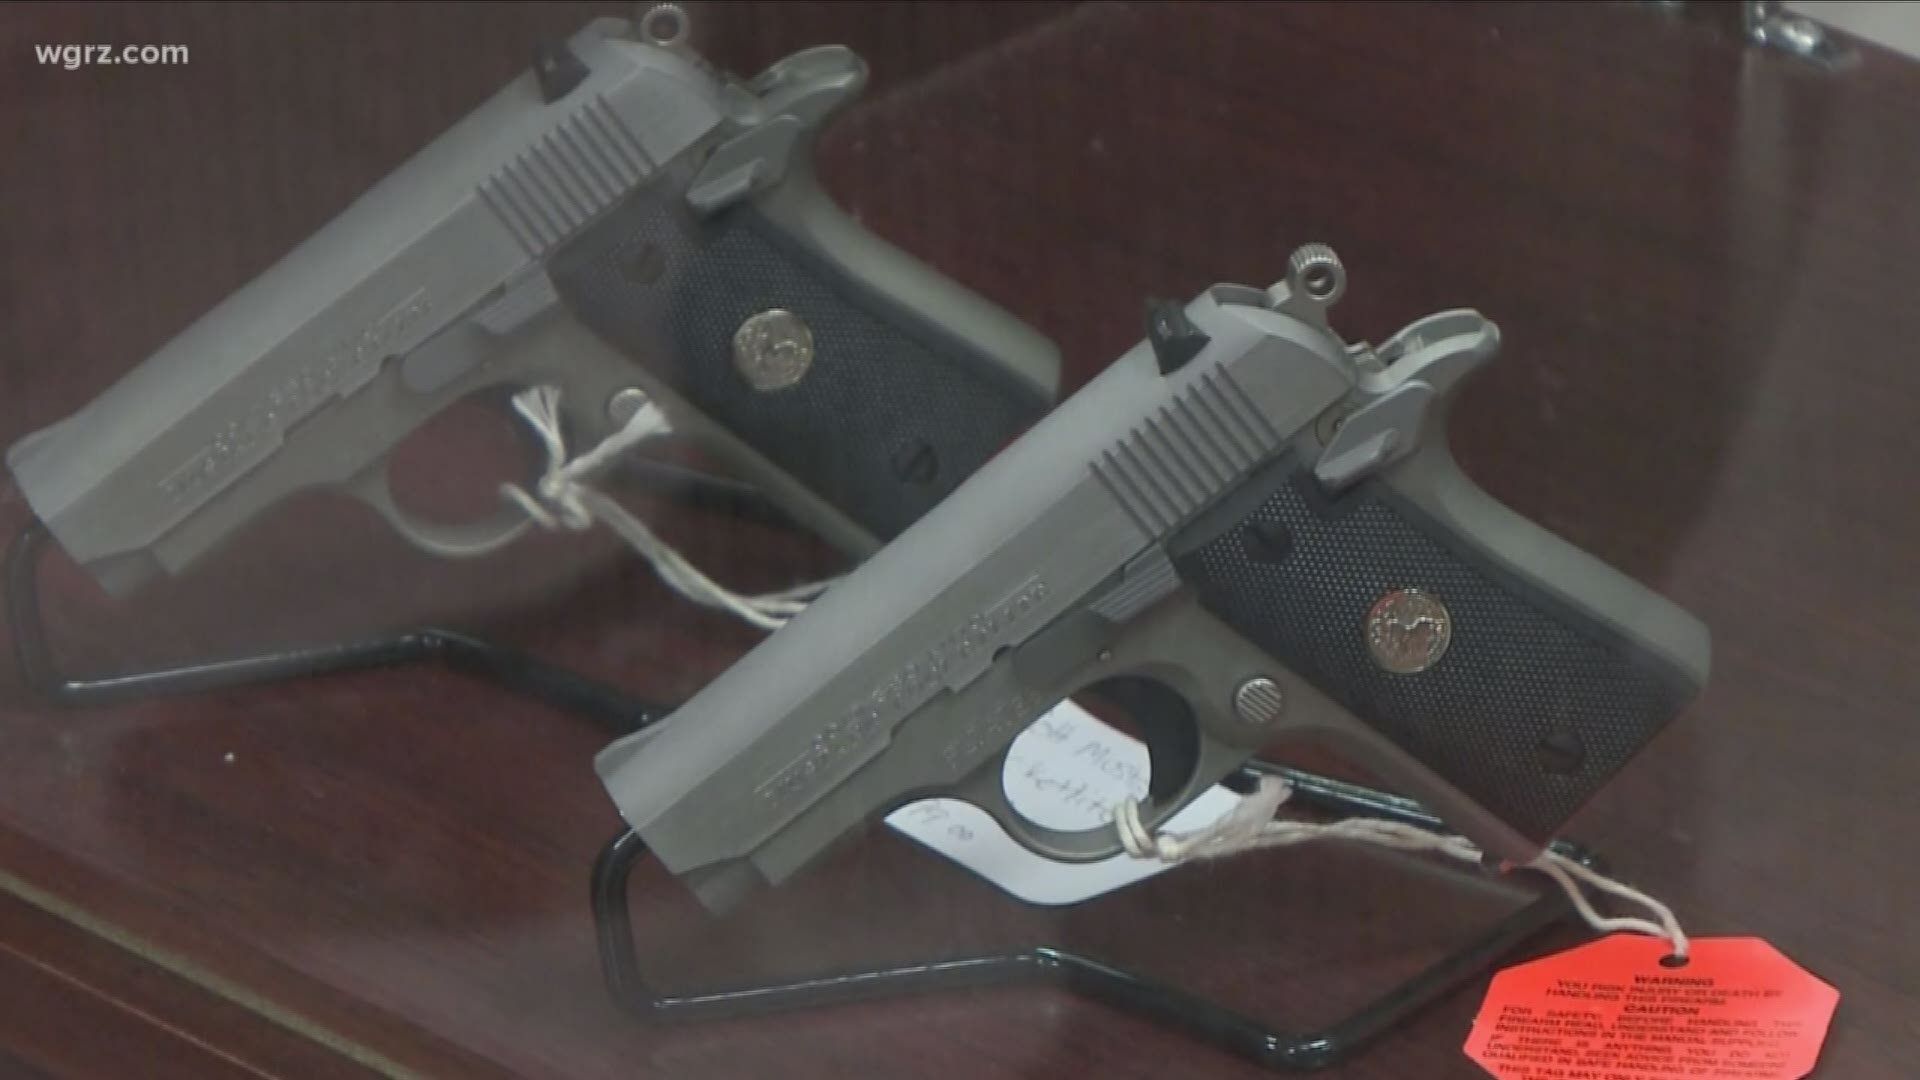 Lawsuit aiming to overturn pistol permit requirement